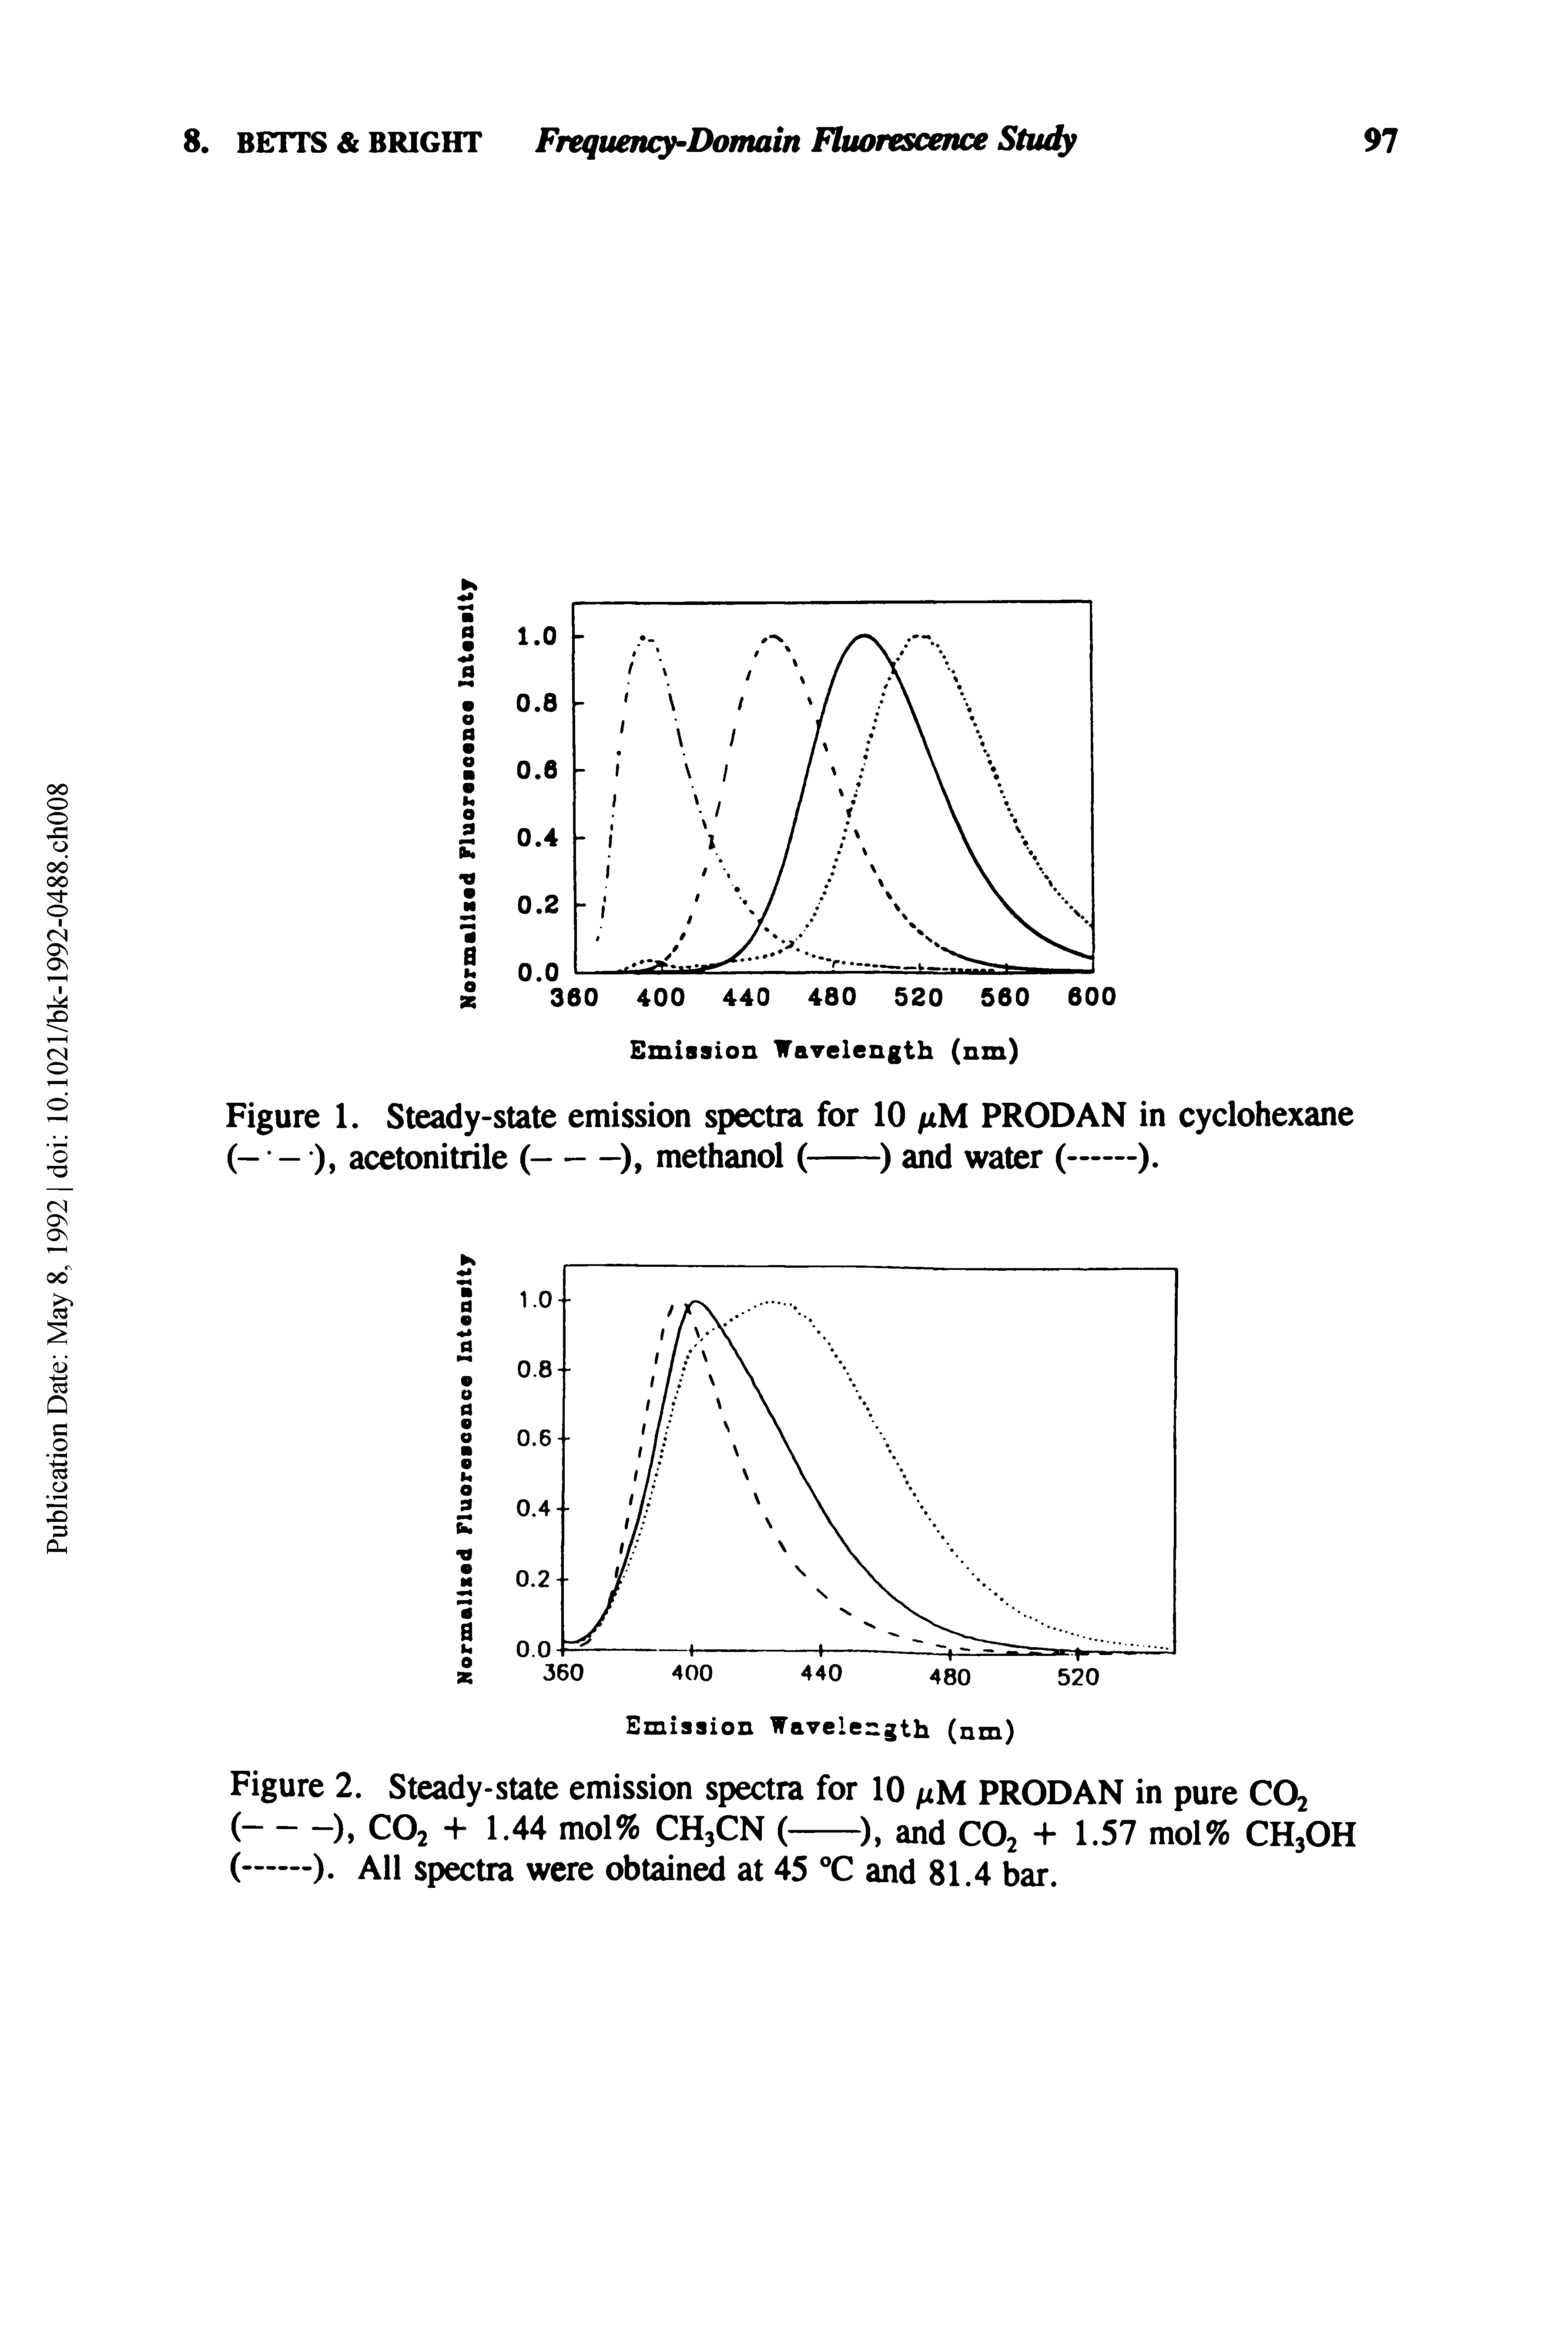 Figure 1. Steady-state emission spectra for 10 /xM PRODAN in cyclohexane (- - ), acetonitrile (------), methanol (-----) and water (------).